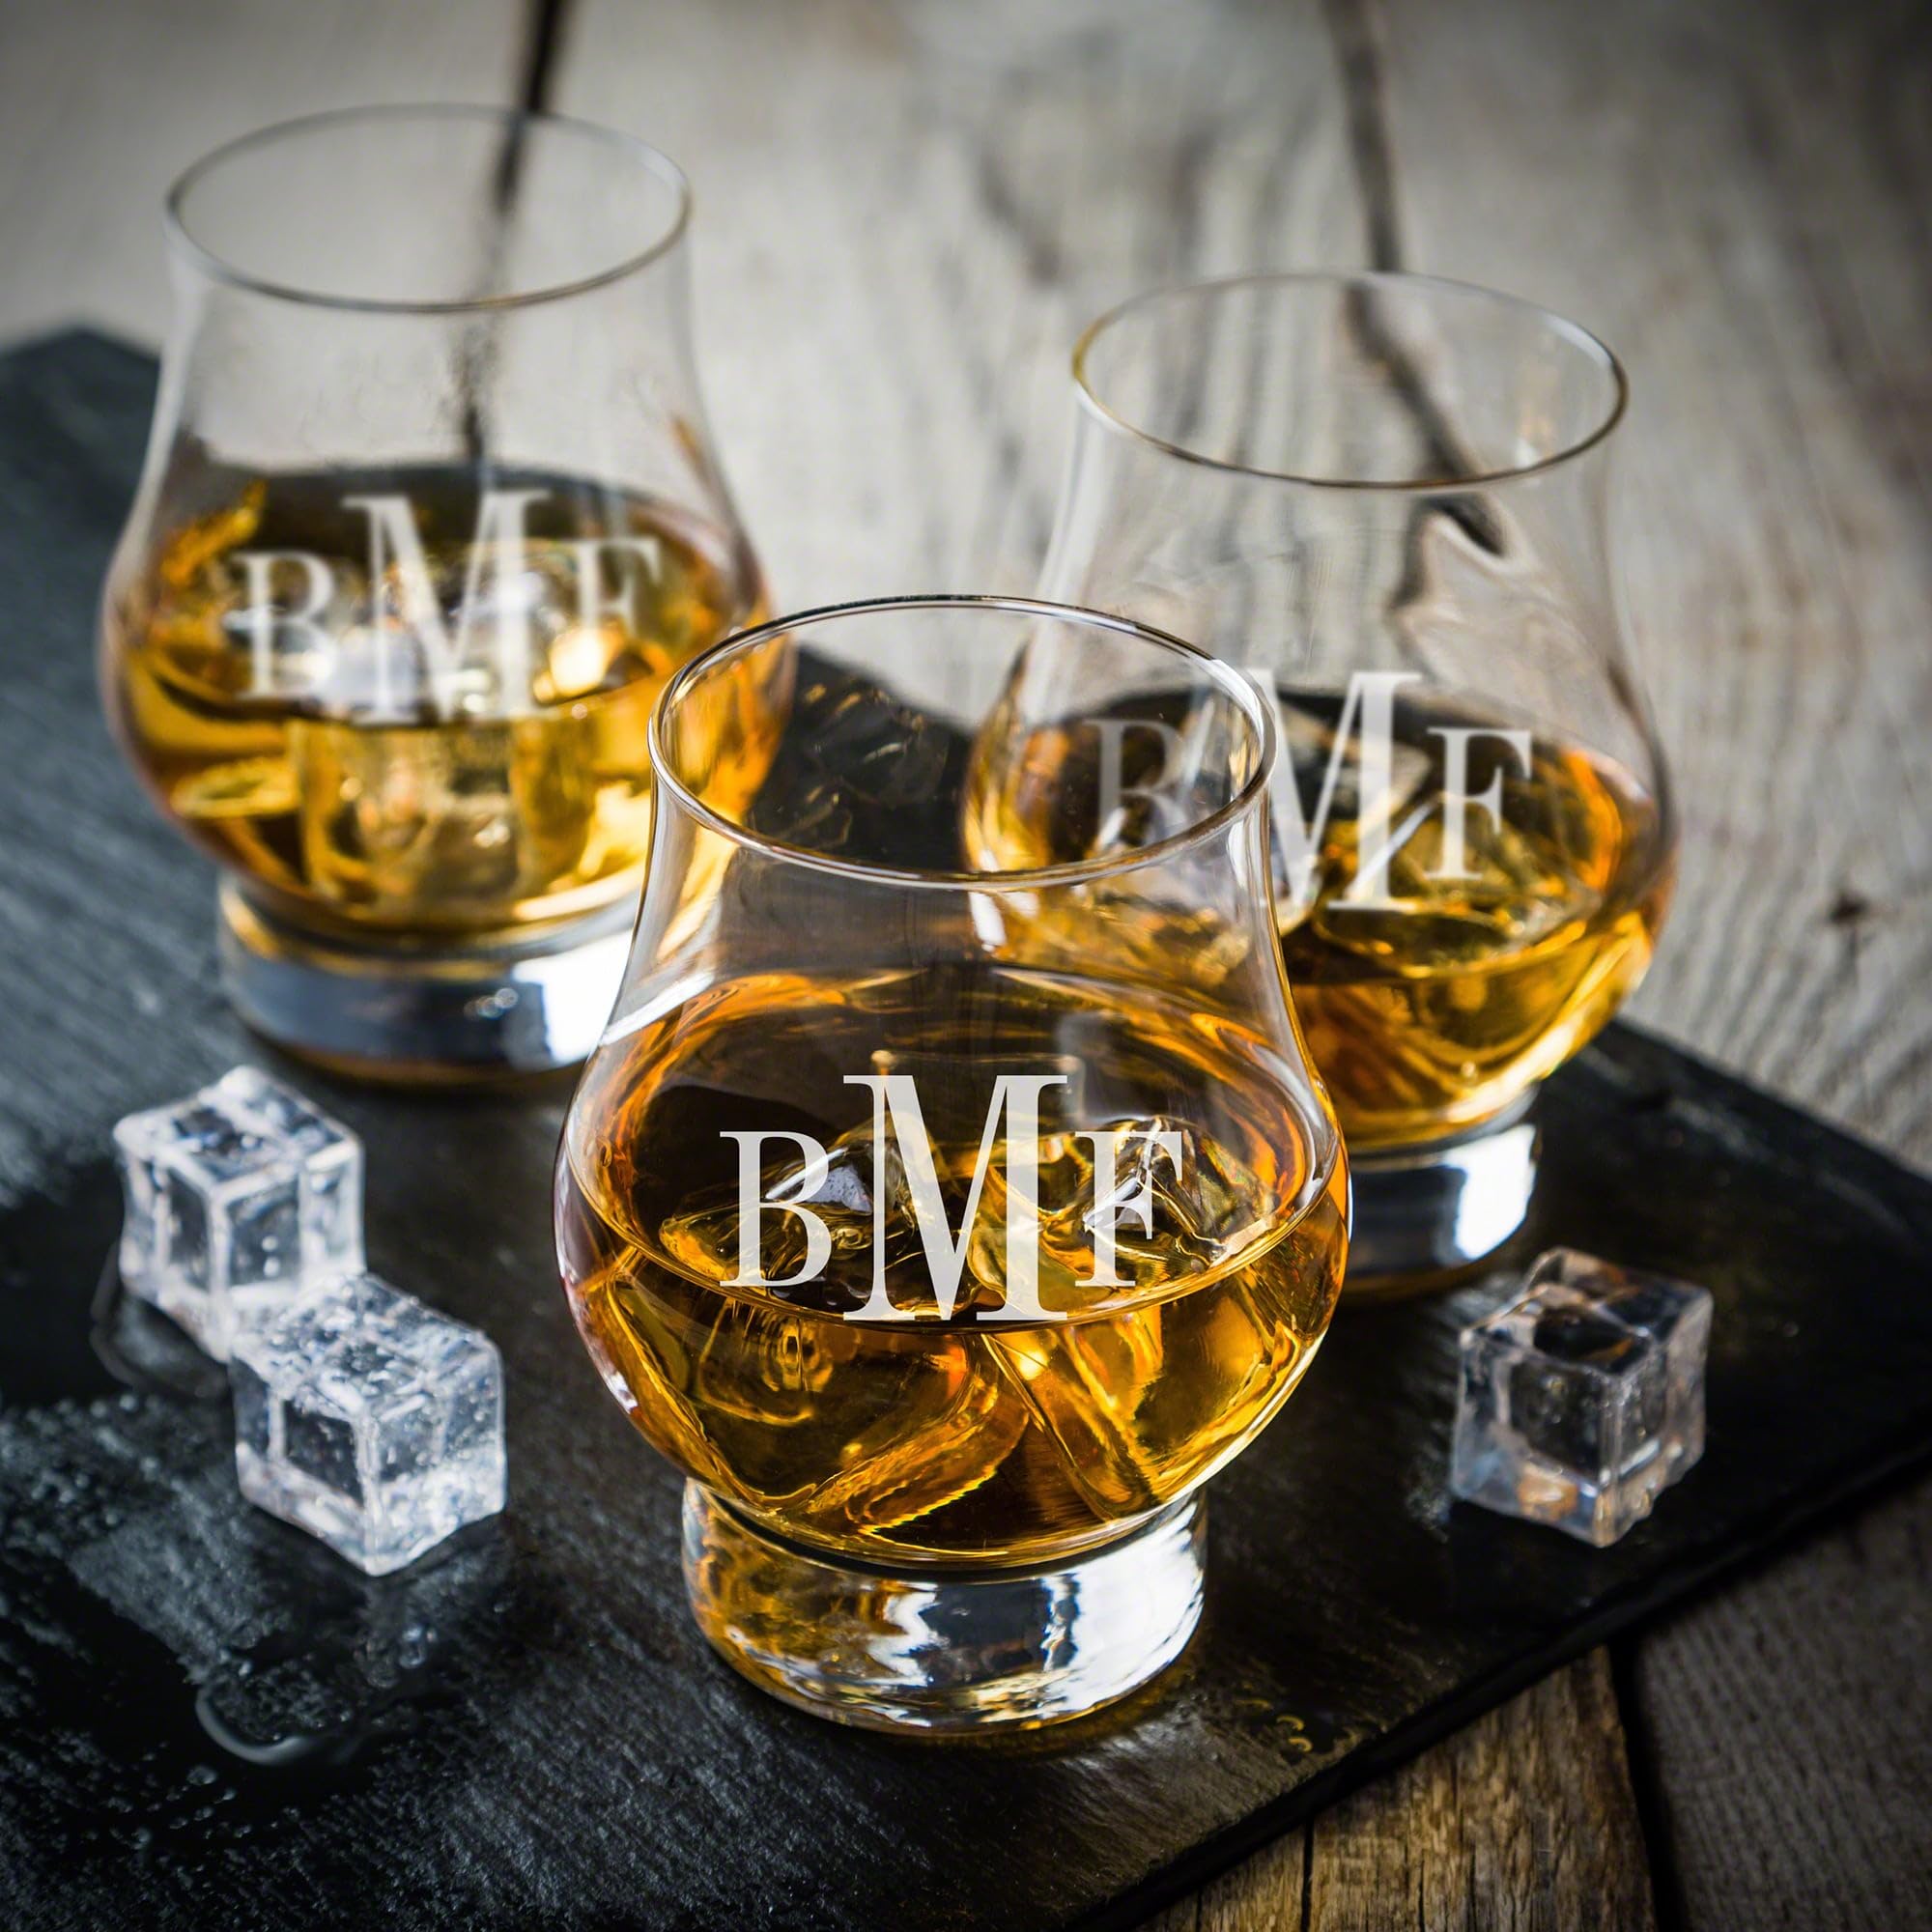 HomeWetBar Engraved Official Kentucky Bourbon Trail Glasses, Set of 4 (Personalized Product)